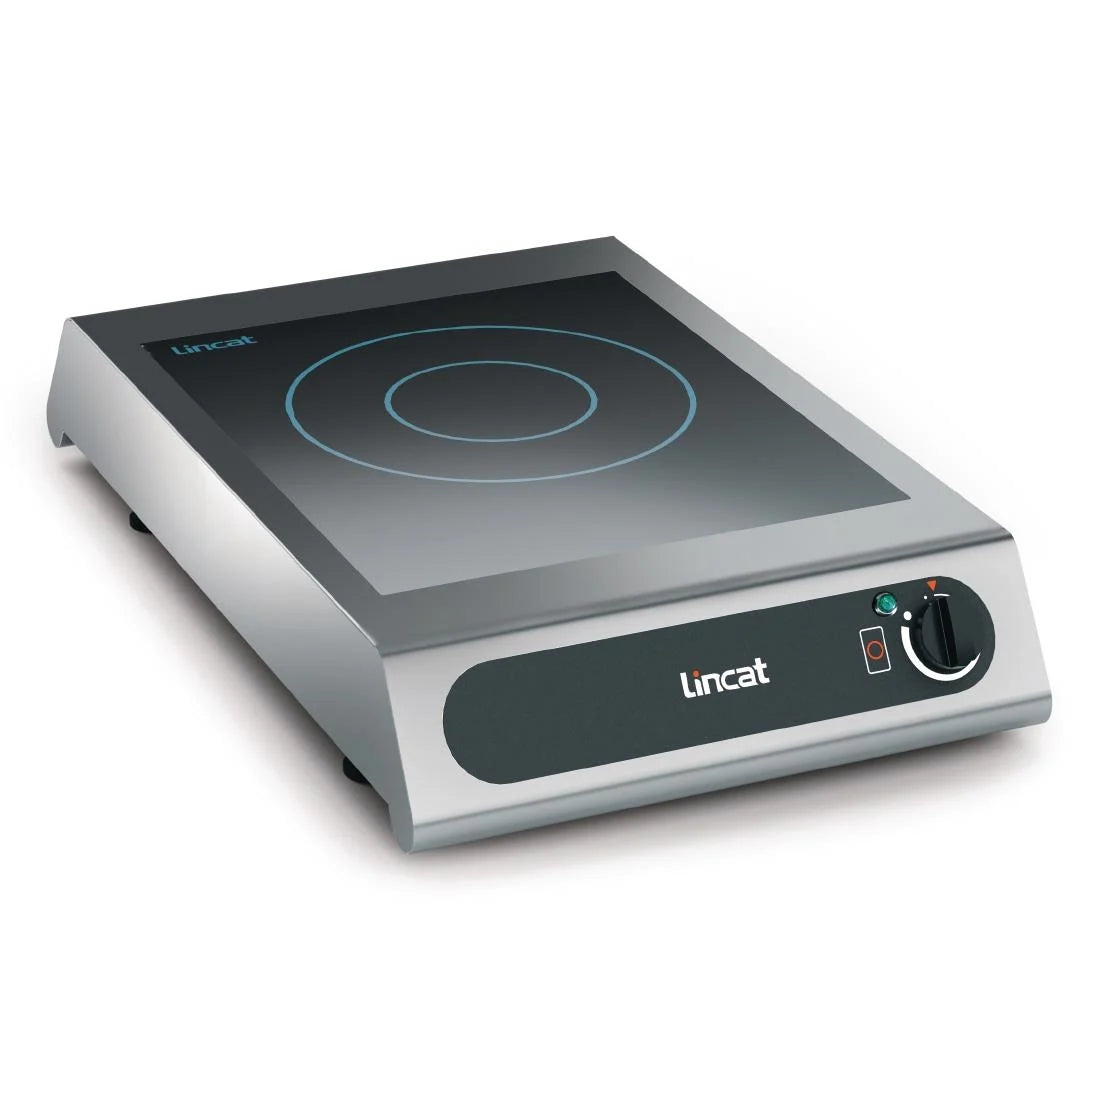 Lincat Lynx 400 Induction Hob IH3.Product Ref:00710.Model:GL526. 🚚 3-5 Days Delivery